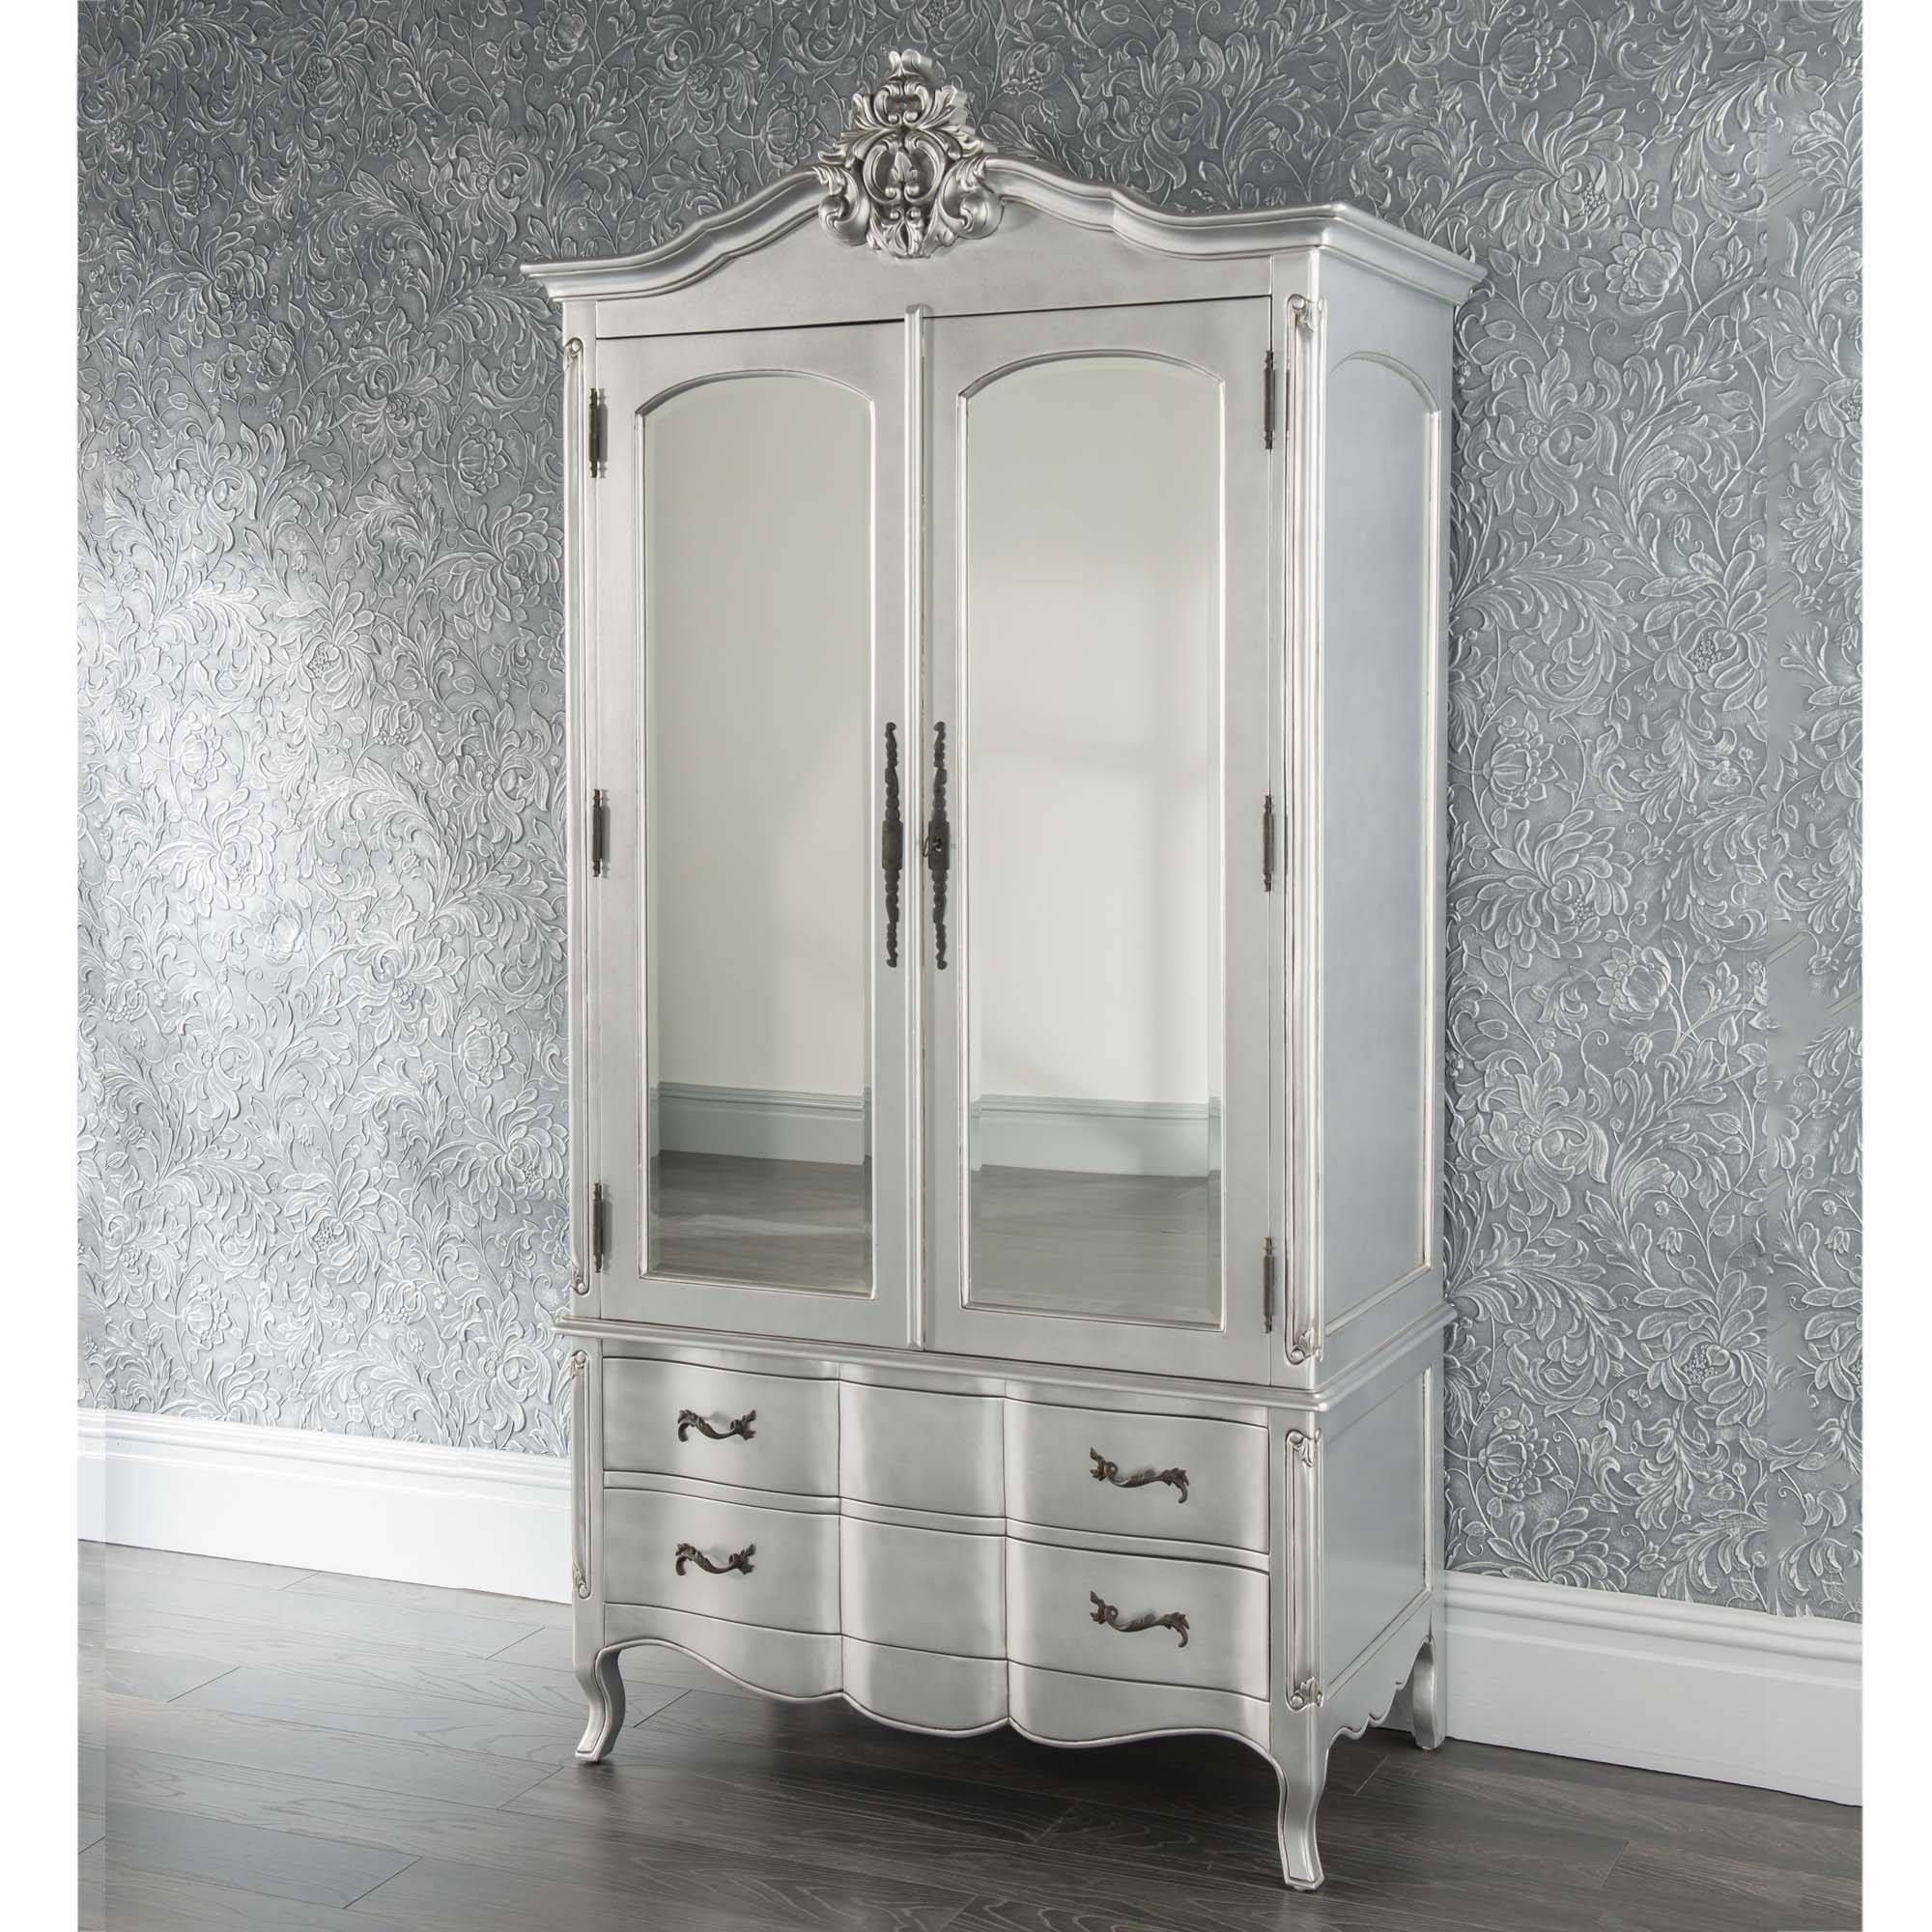 Estelle Antique French Style Wardrobe | Shabby Chic Inside Silver French Wardrobes (View 9 of 15)